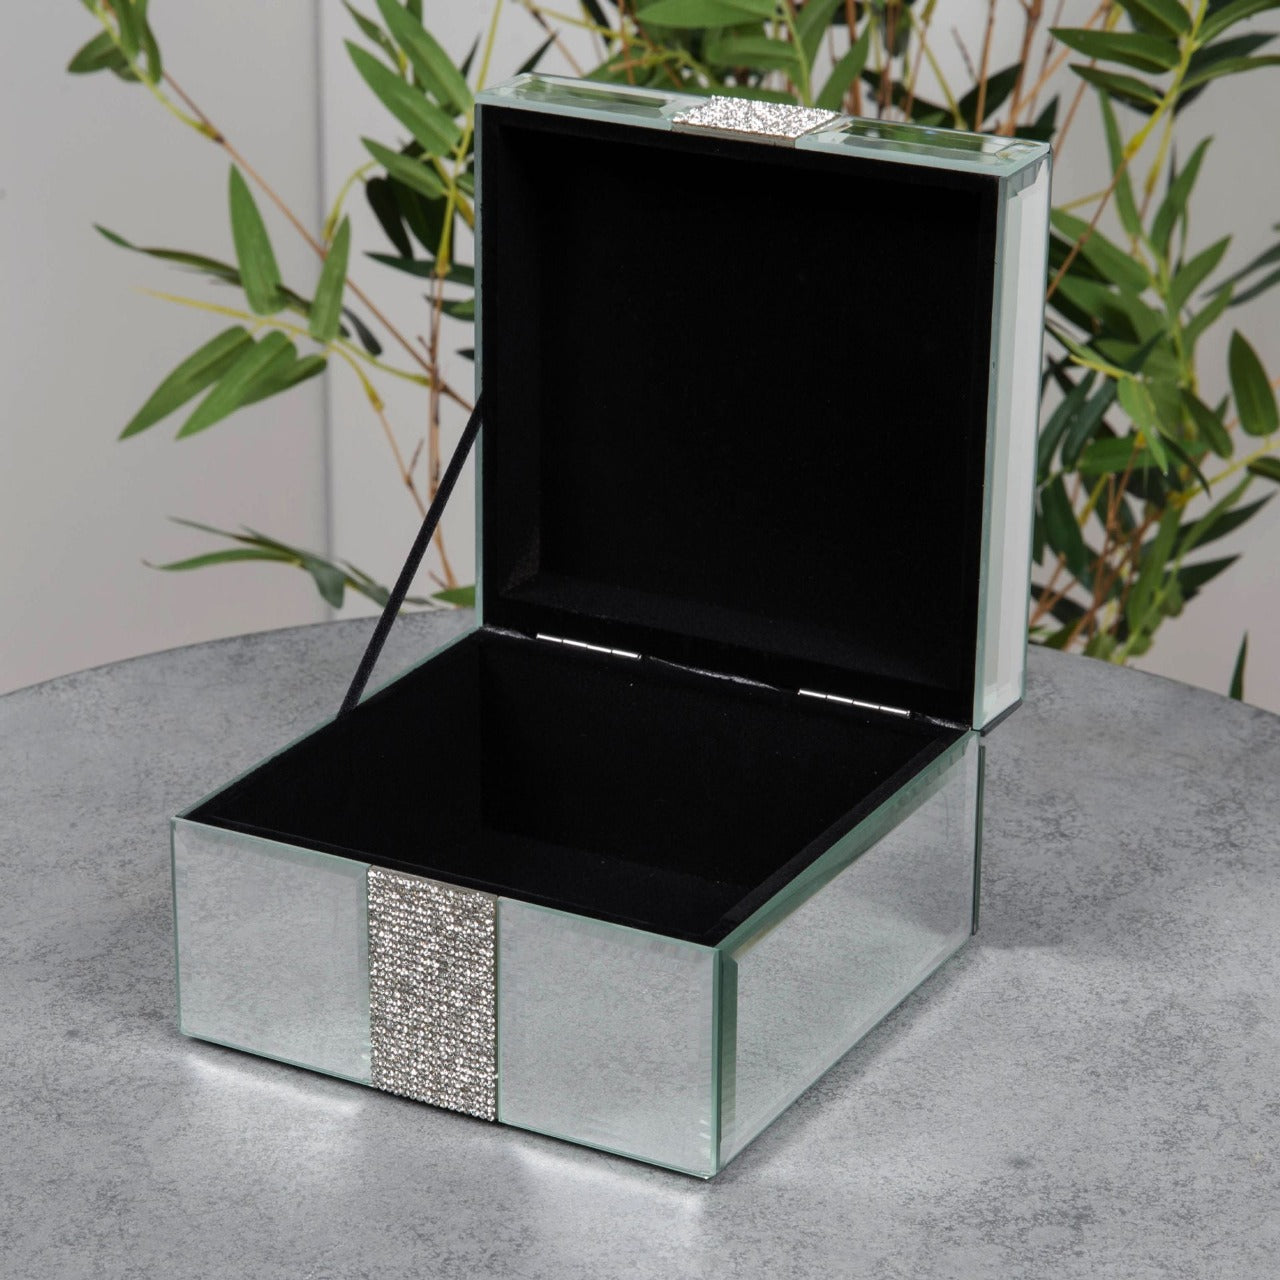 Mirror Jewellery Box with Diamante Band - Small  Store your jewellery and accessories in twinkling style with this diamante decorated mirror glass jewellery box. From the HESTIA® Silver Luxe collection - unparalleled glamour, style and elegance in contemporary home and gift.